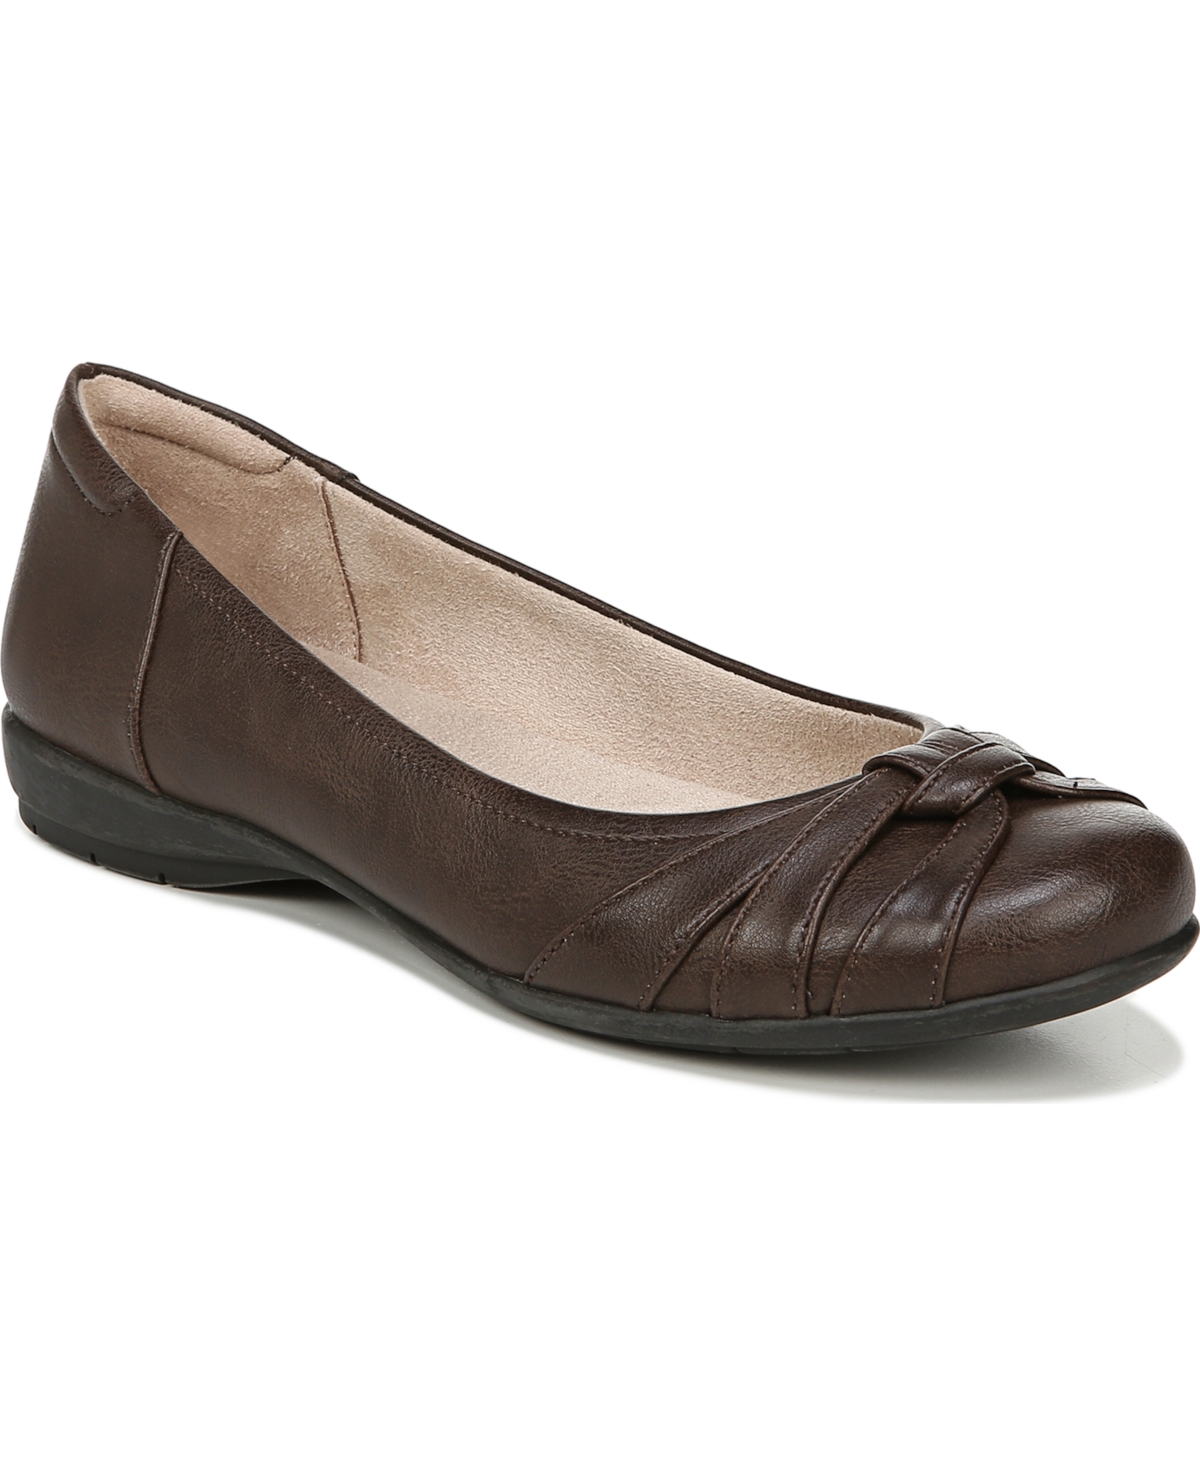 UPC 736705003298 product image for Soul Naturalizer Gift Flats Women's Shoes | upcitemdb.com